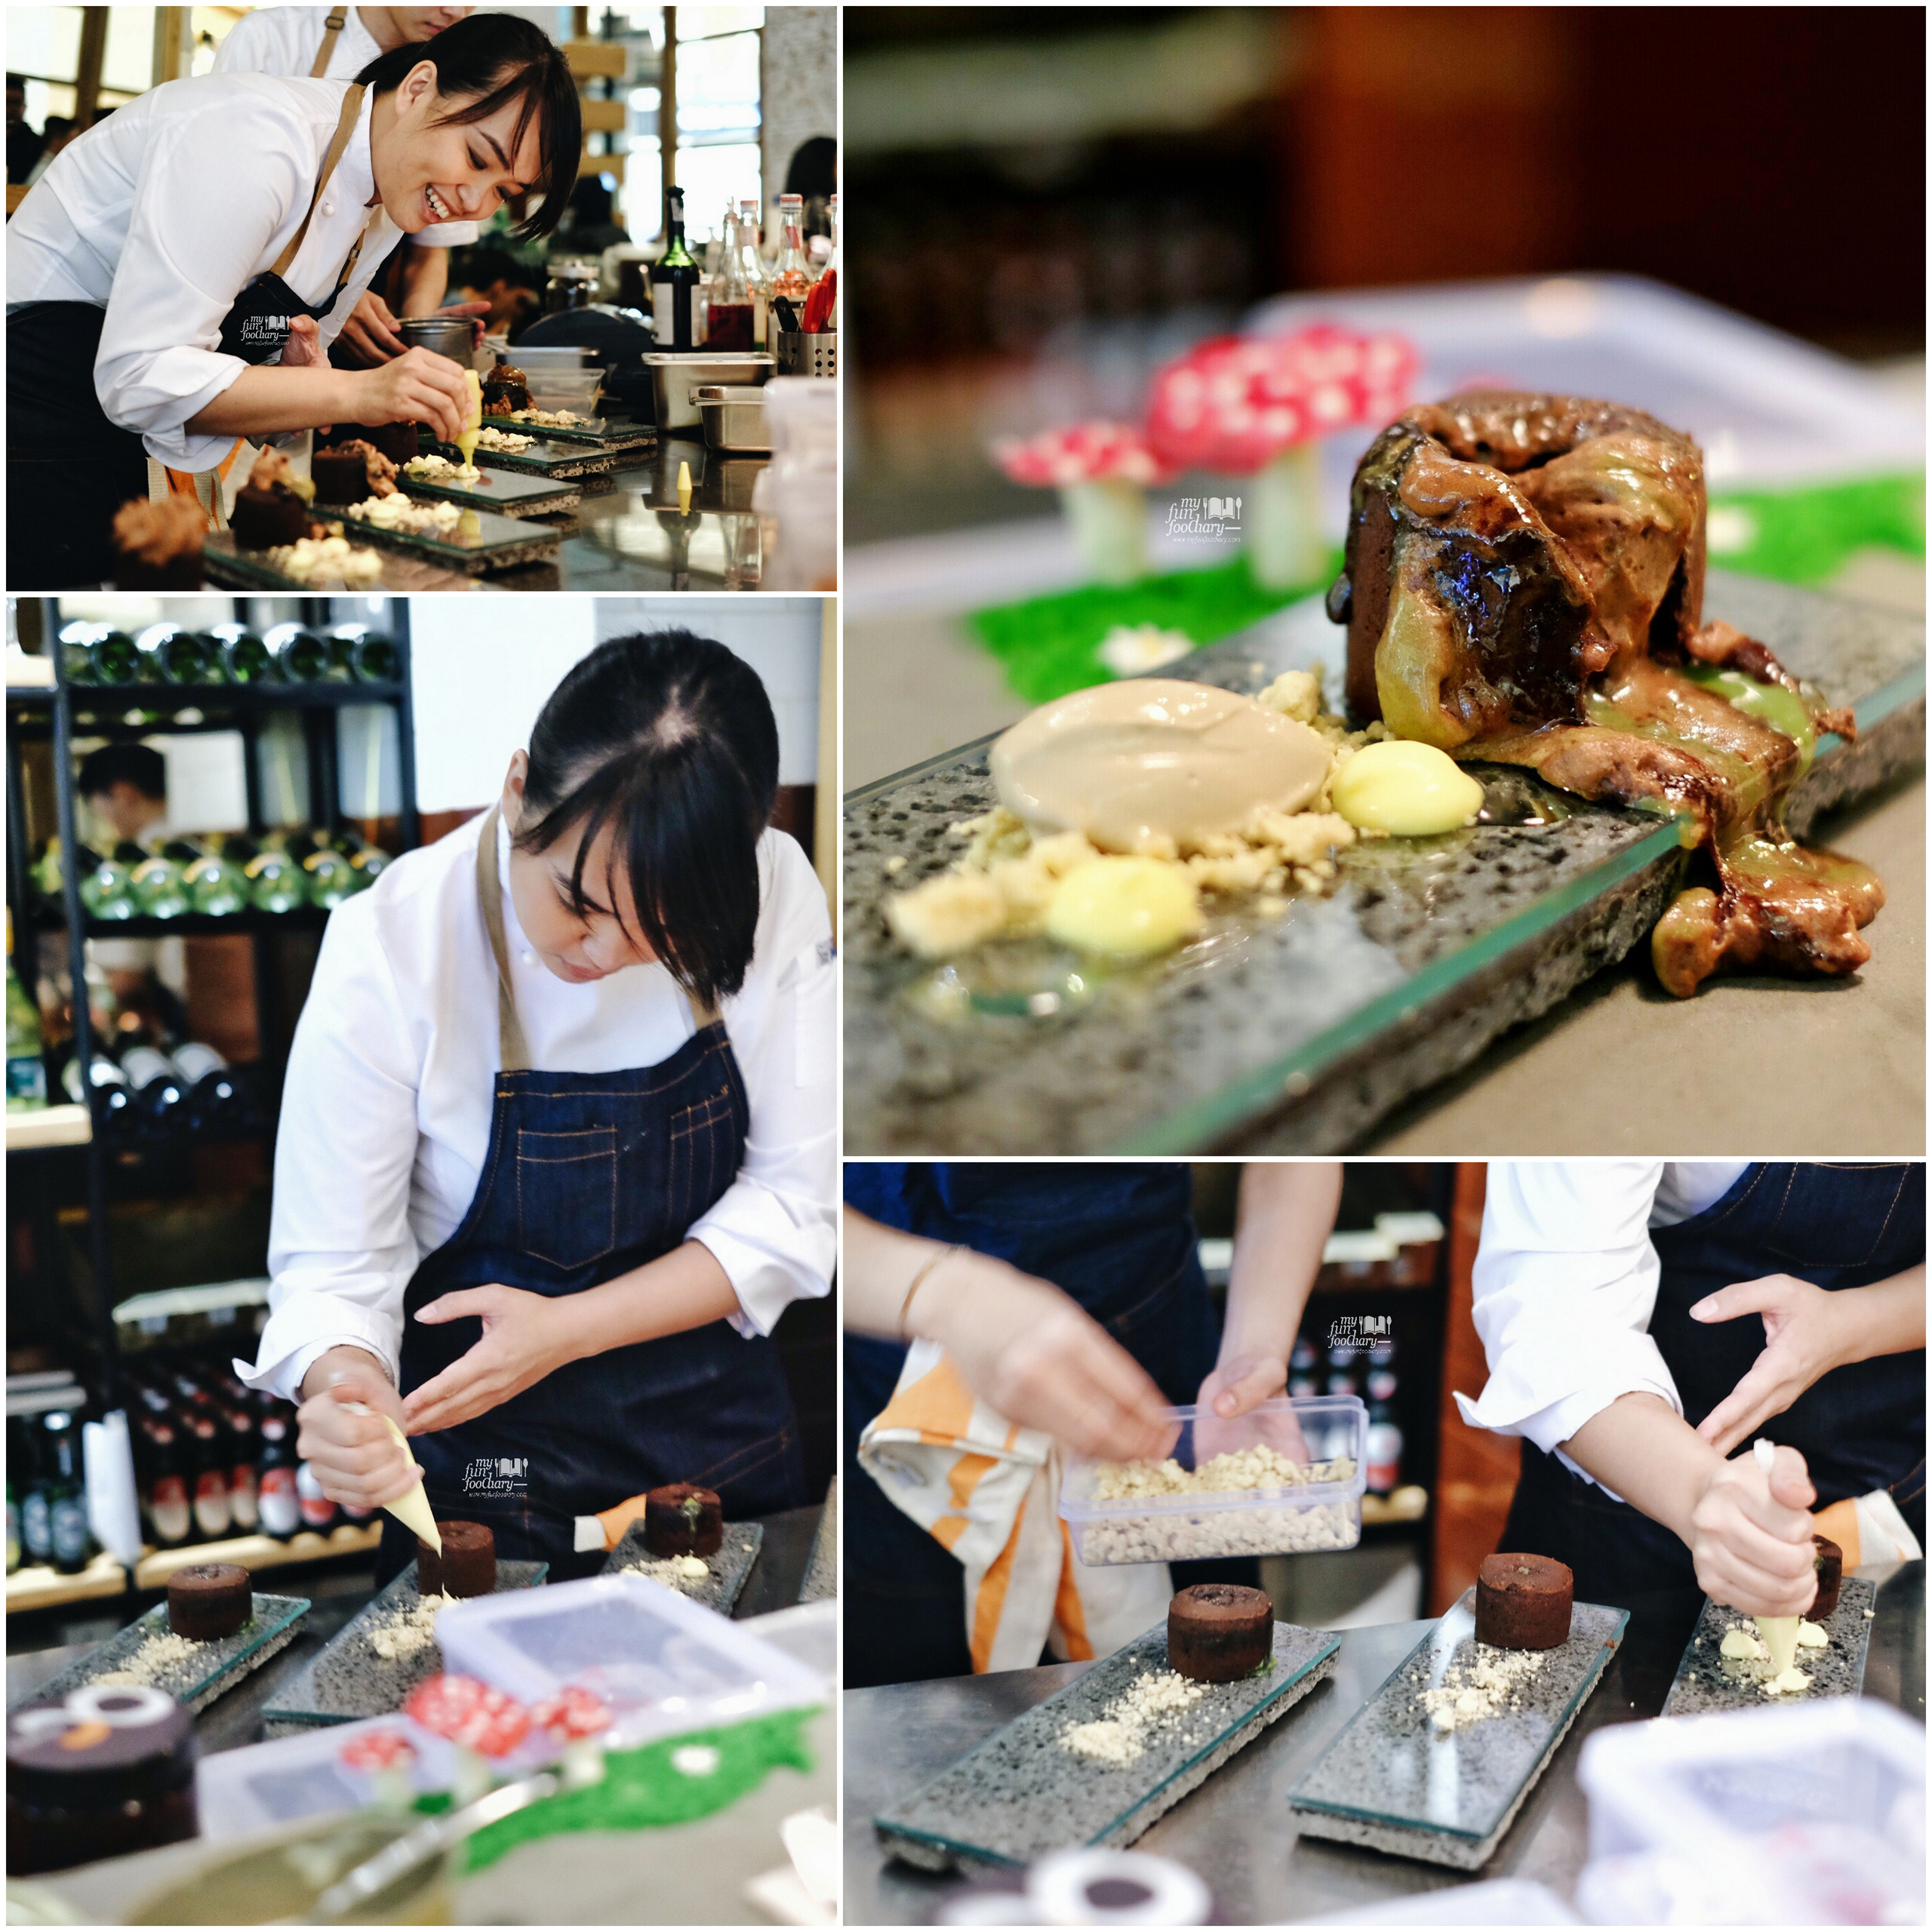 Kim Pangestu in action at Nomz - by Myfunfoodiary